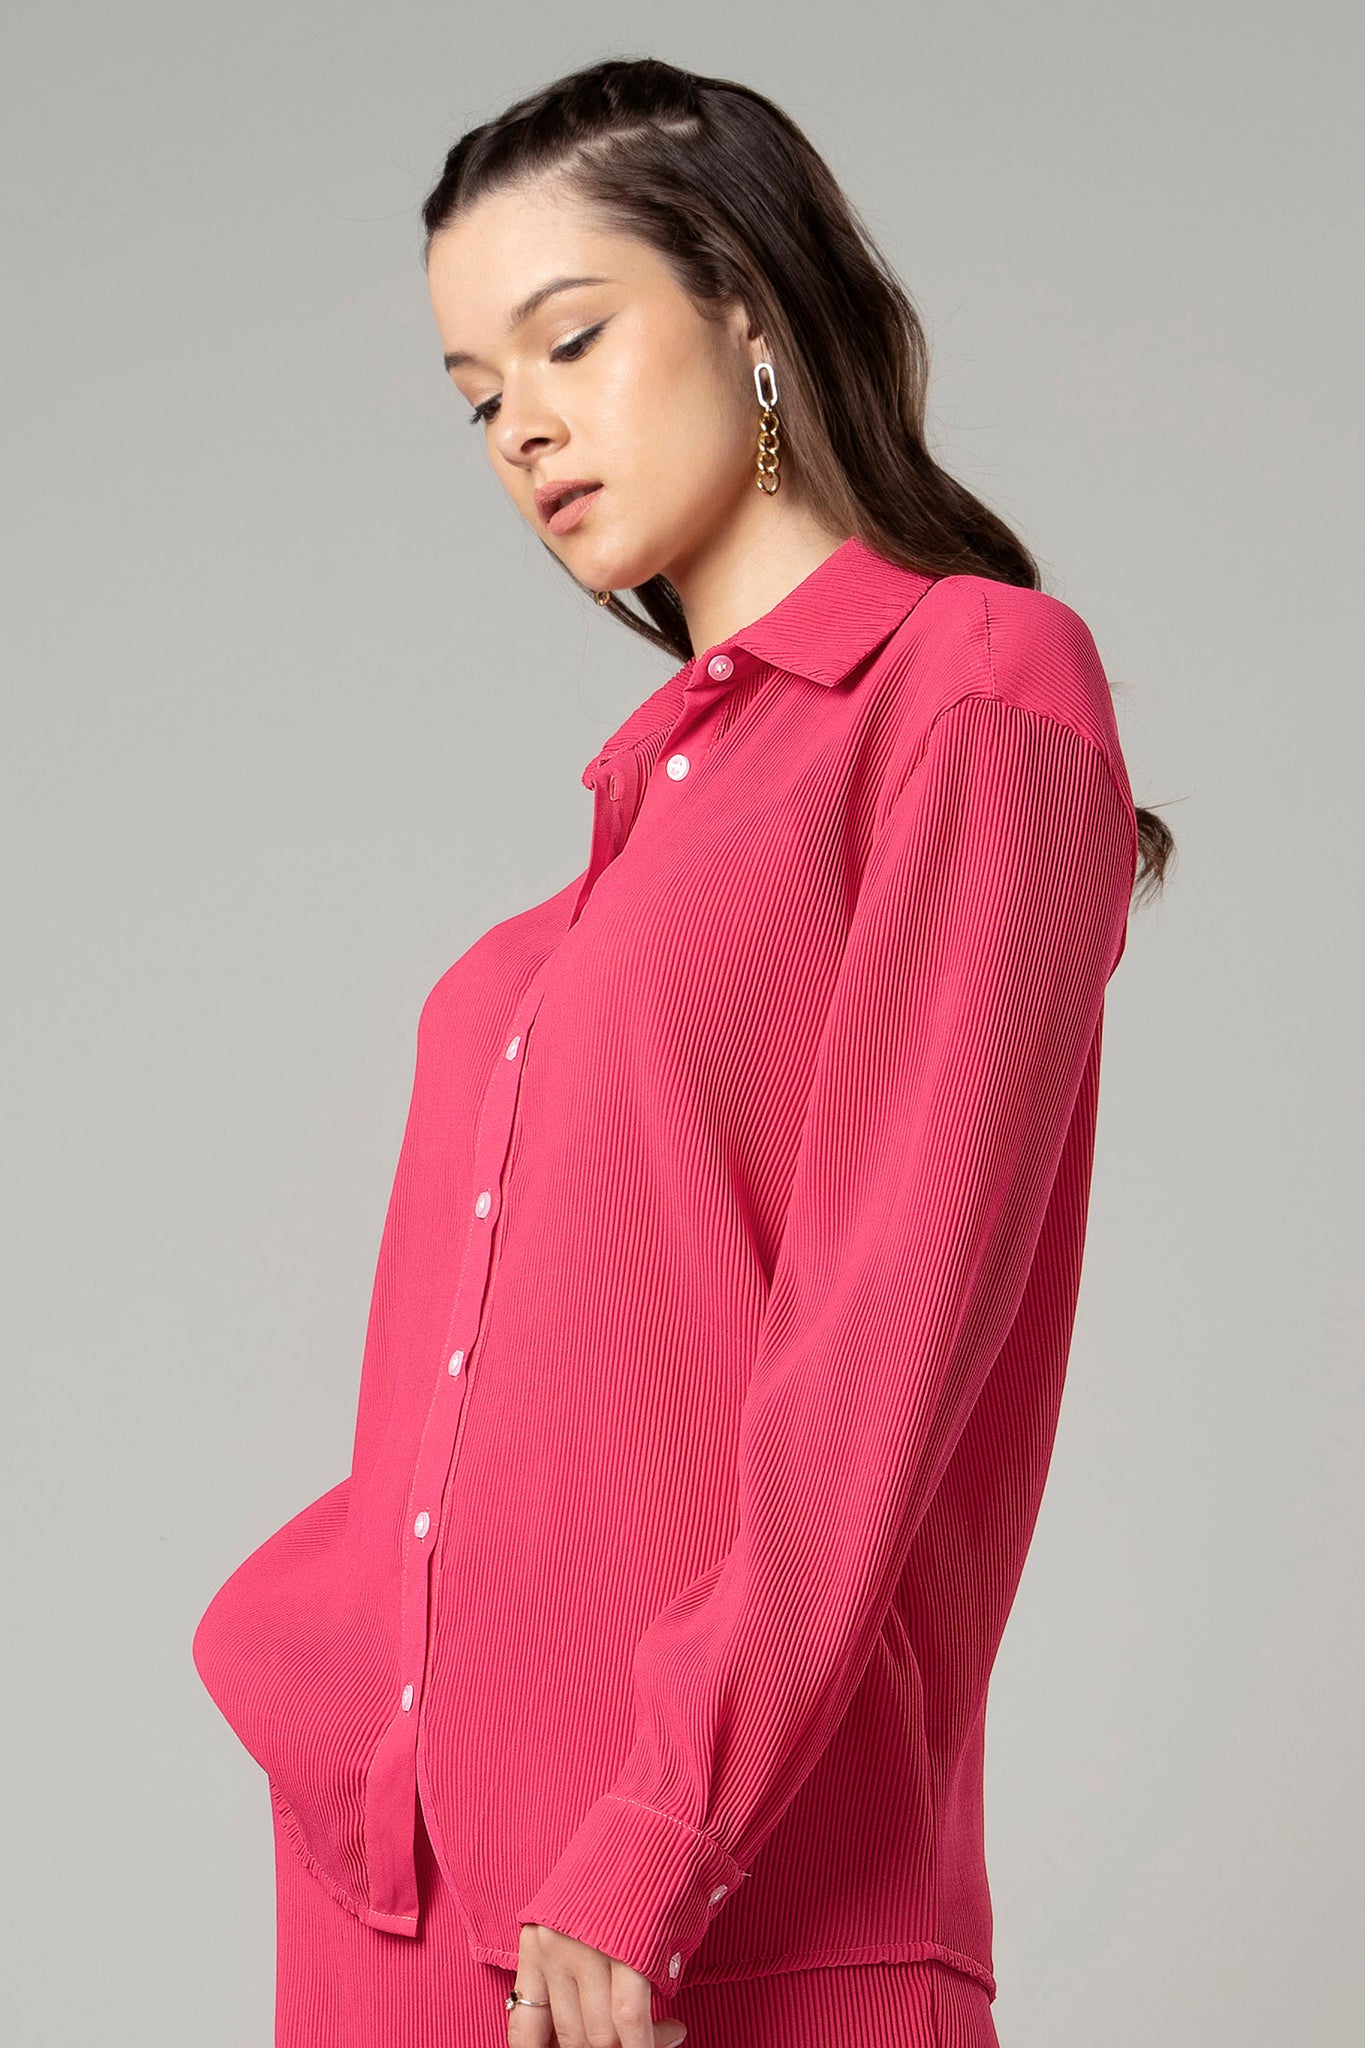 Exclusive Hot Pink Pleated Shirt For Women